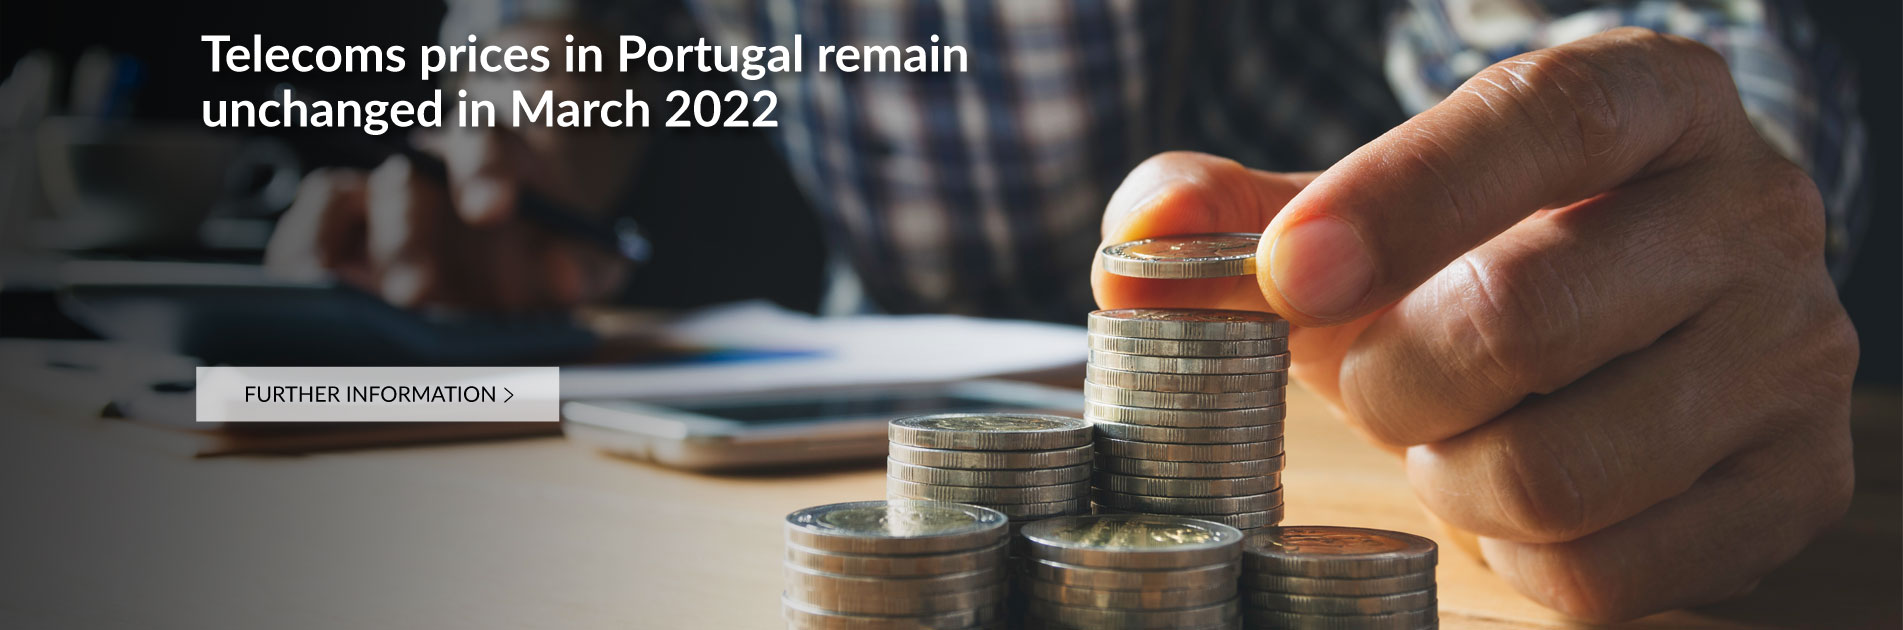 Telecoms prices in Portugal remain unchanged in March 2022